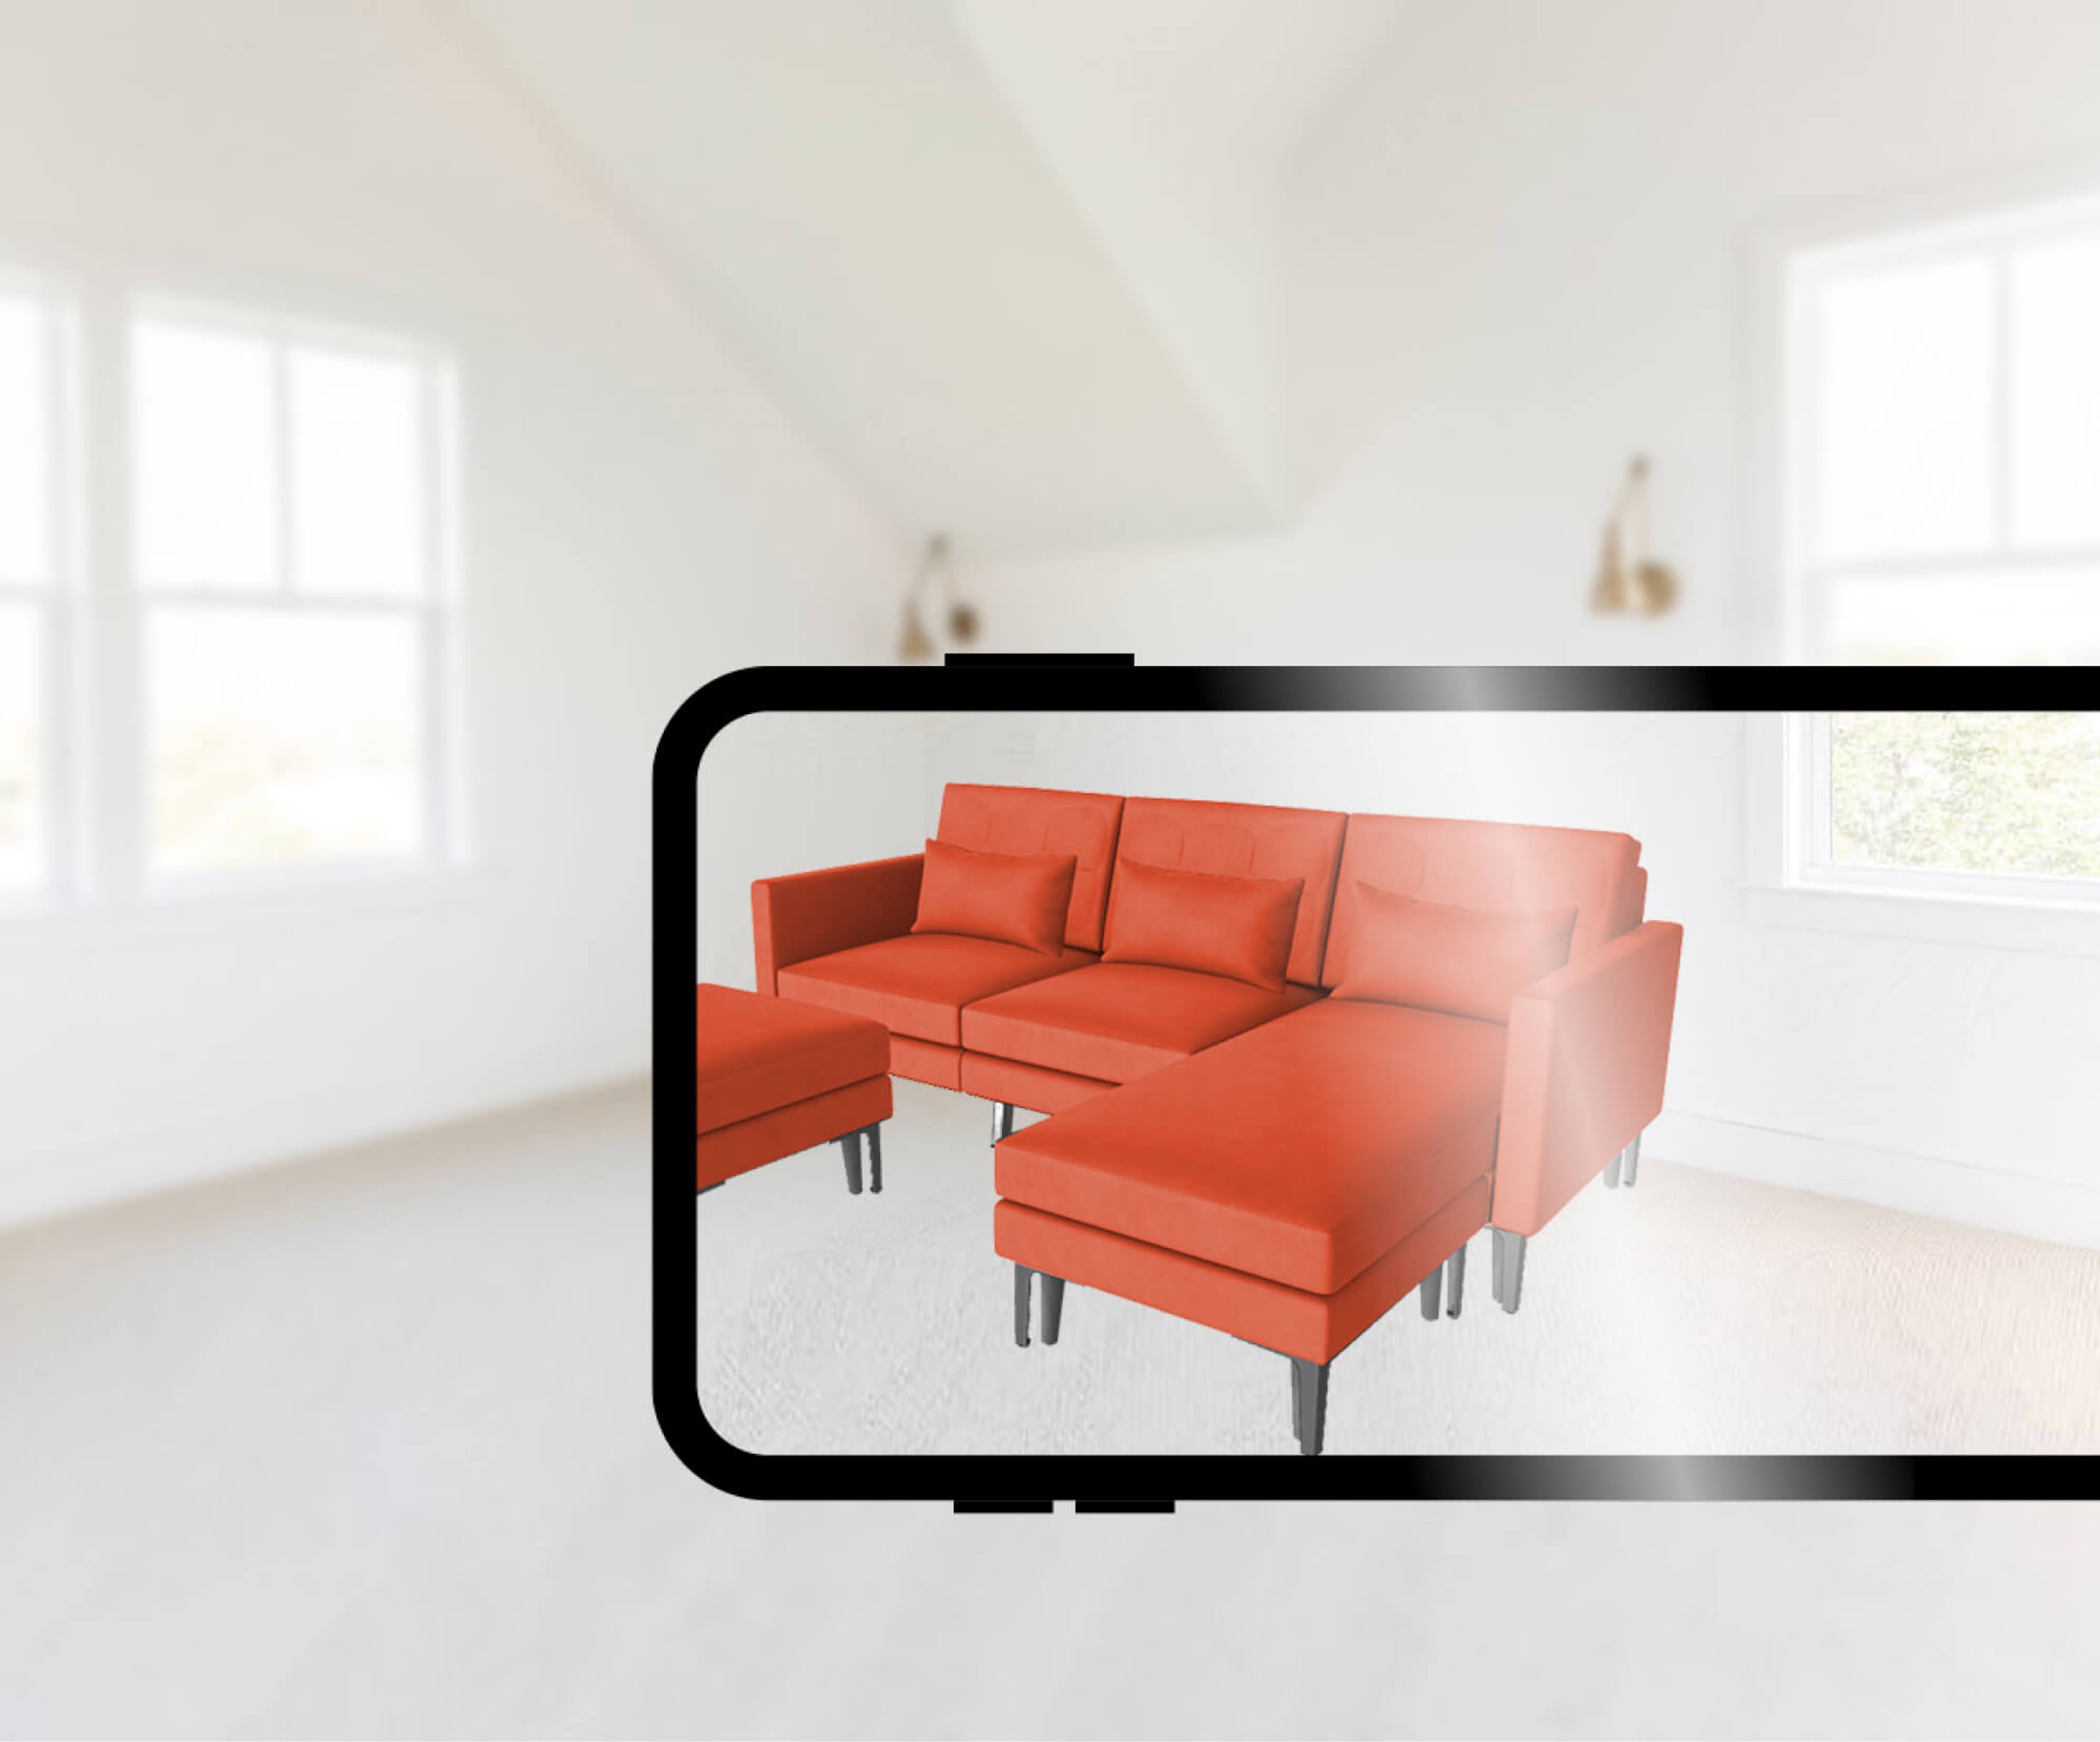 A 3D render of a red couch as viewed through an AR device